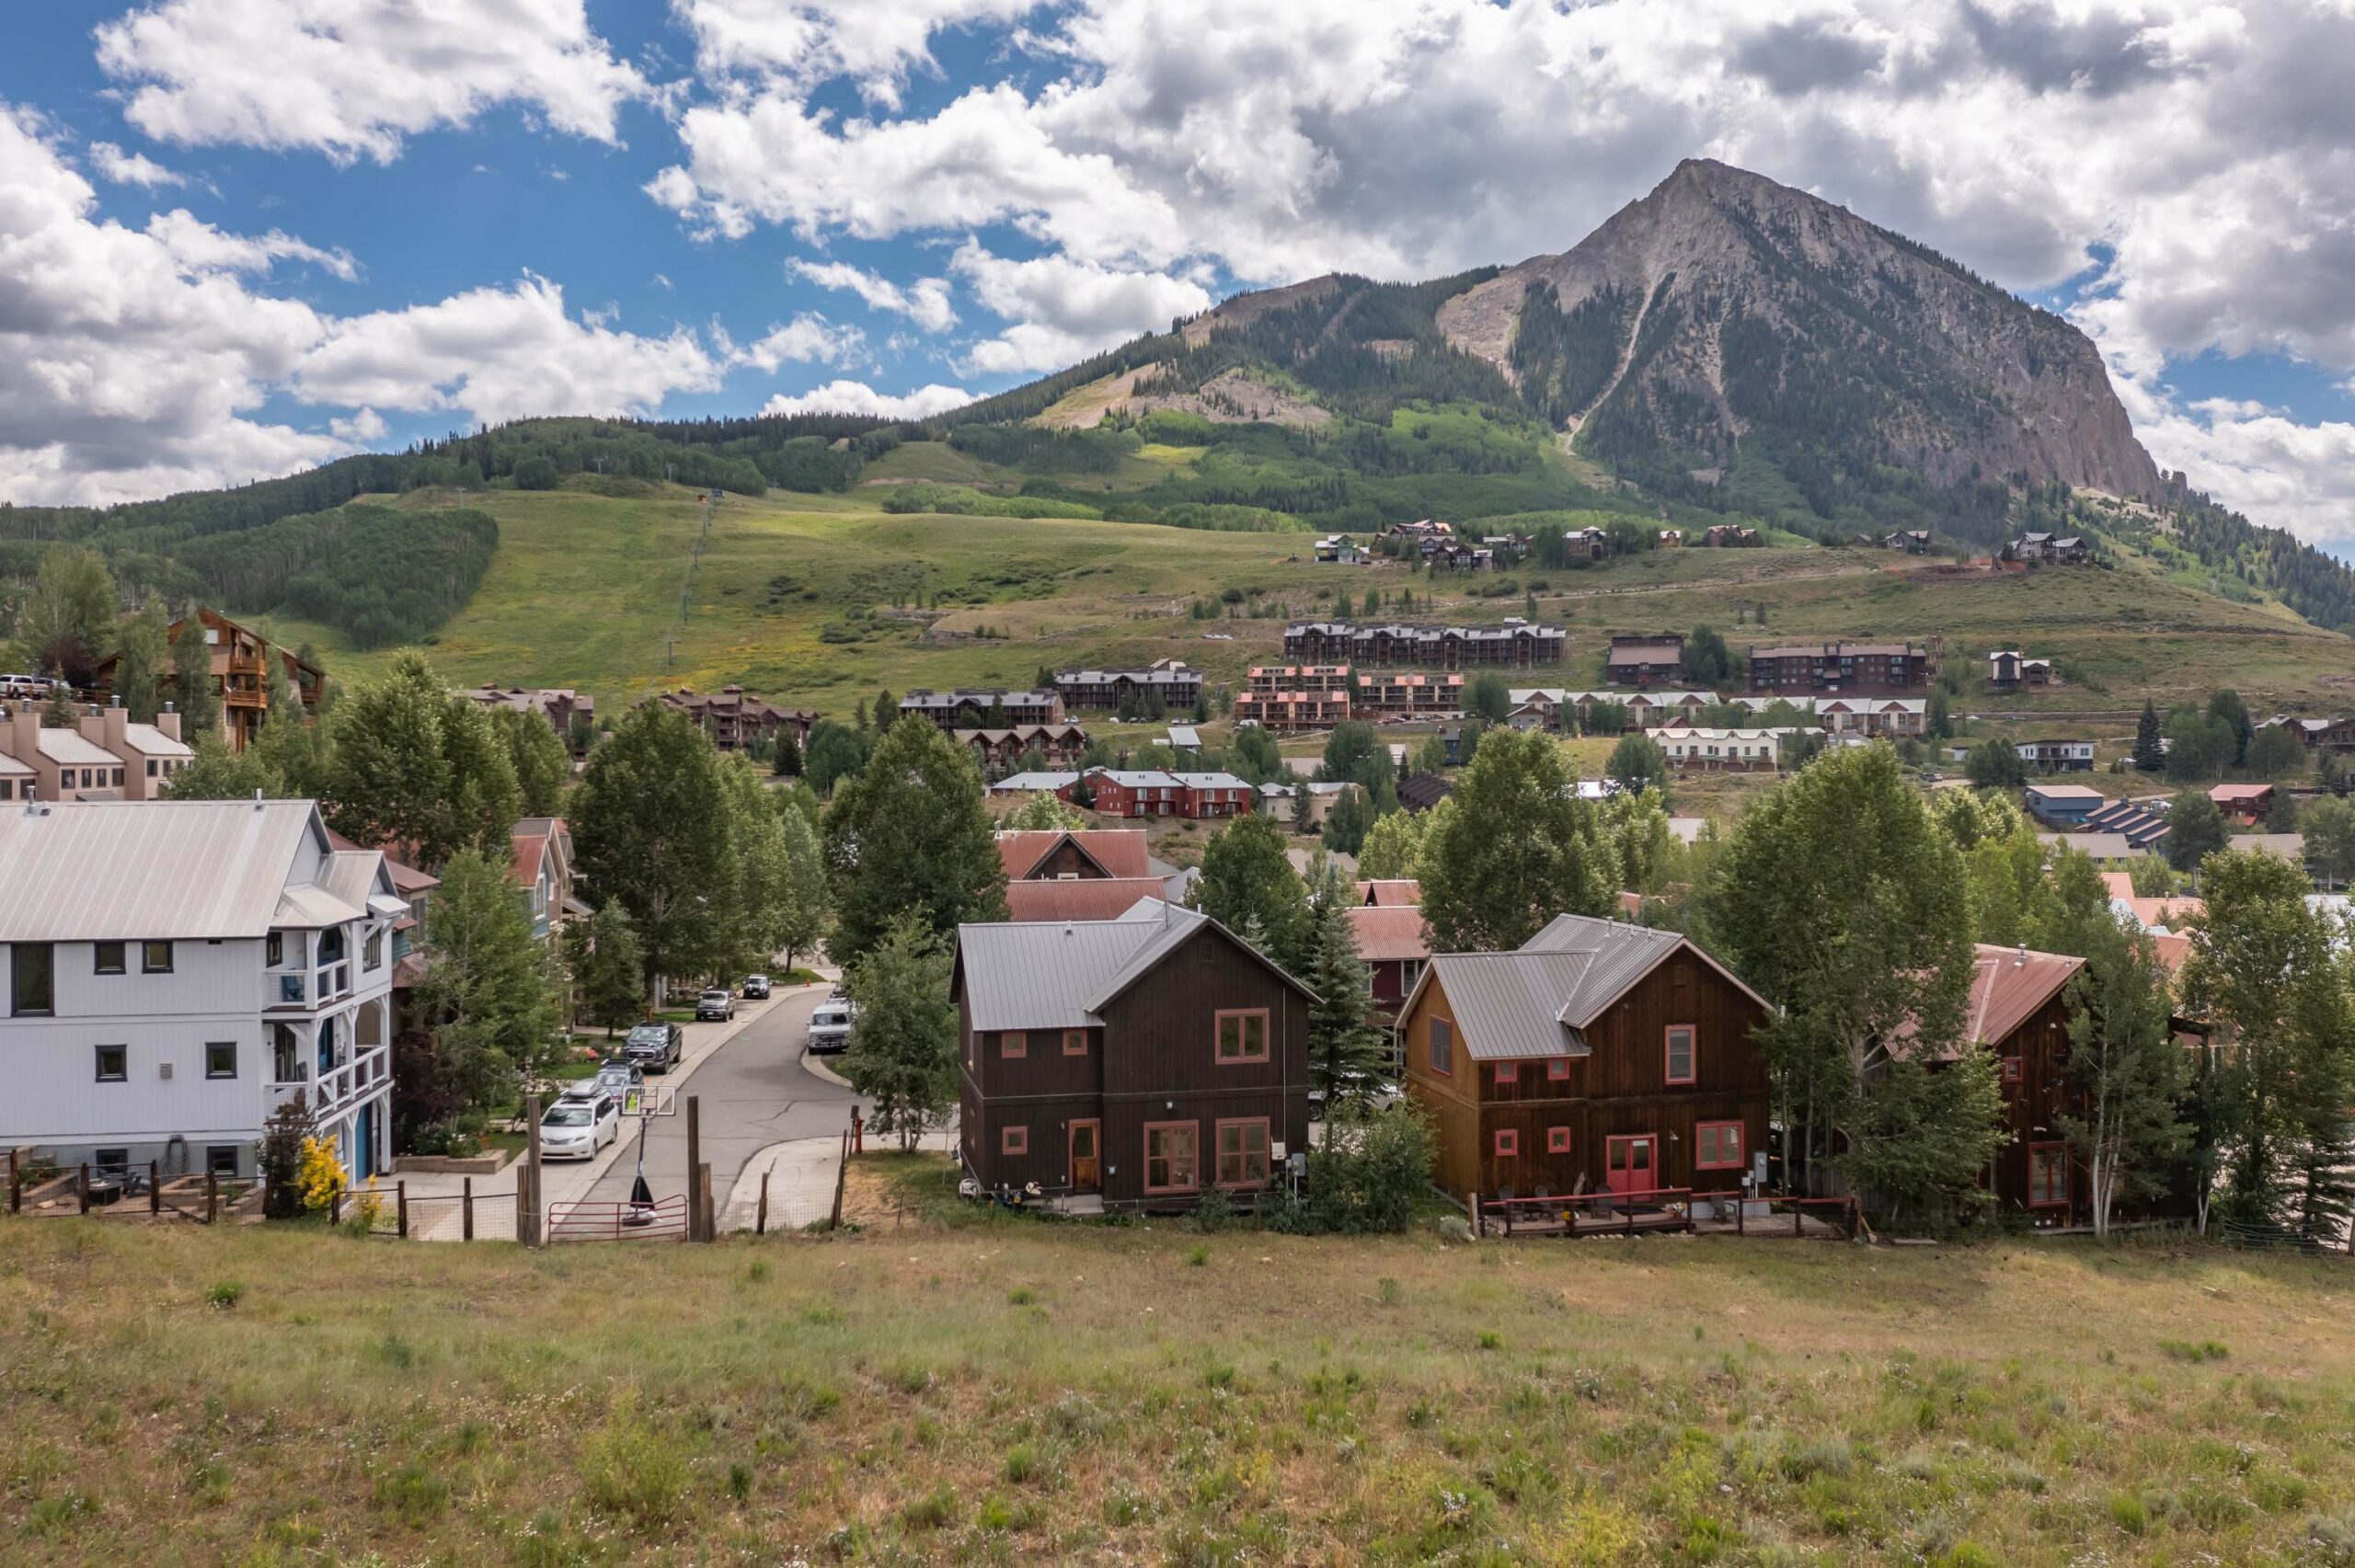 102 Horseshoe Drive Mt. Crested Butte, Colorado - back view of property